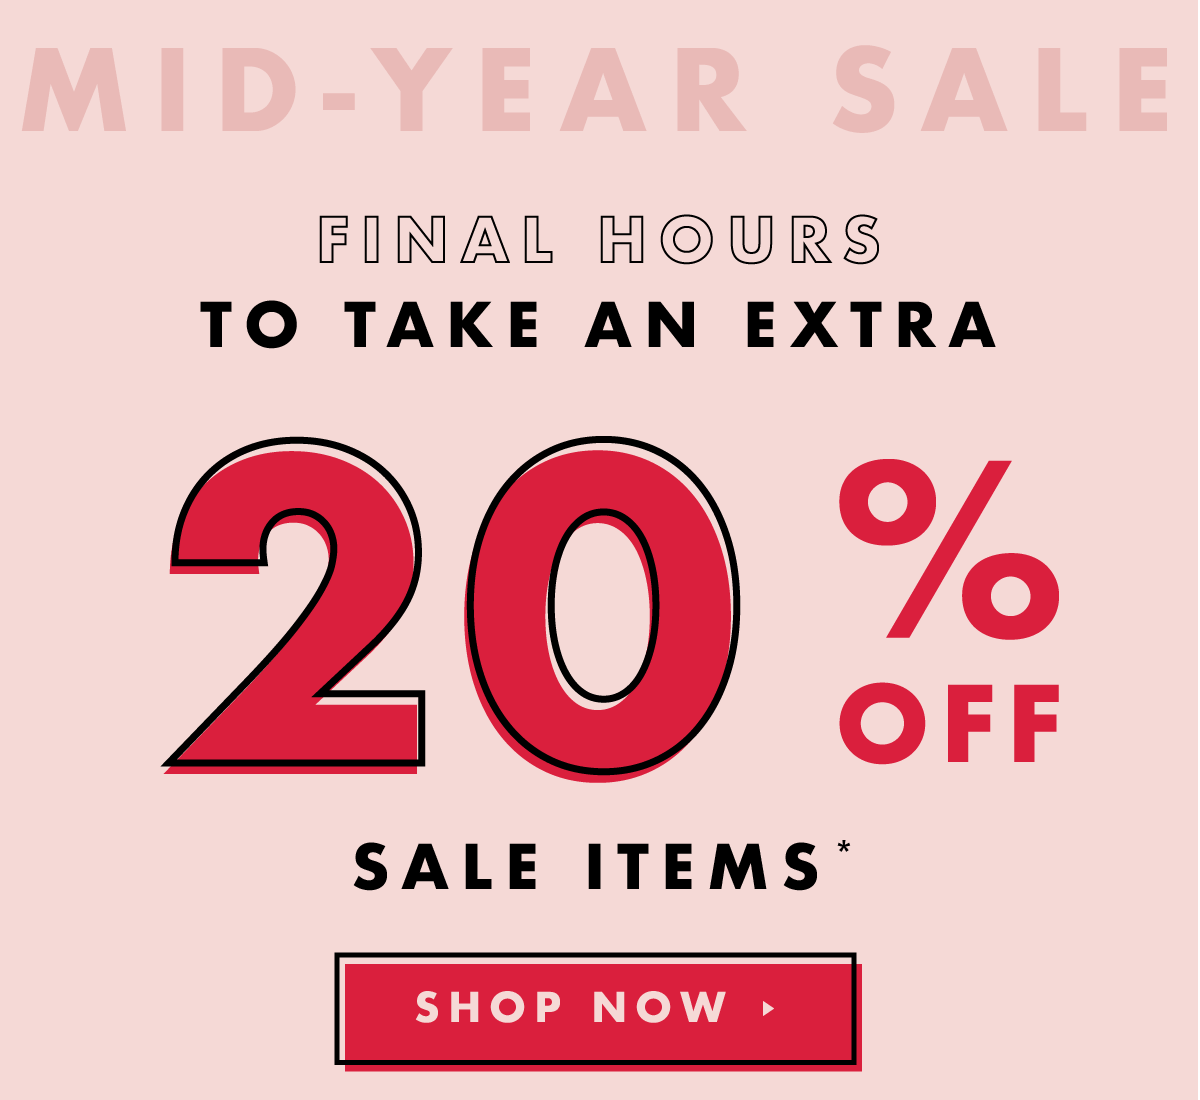 Mid-Year Sale. Final hours to take an extra 20% off sale items!* Shop now. 